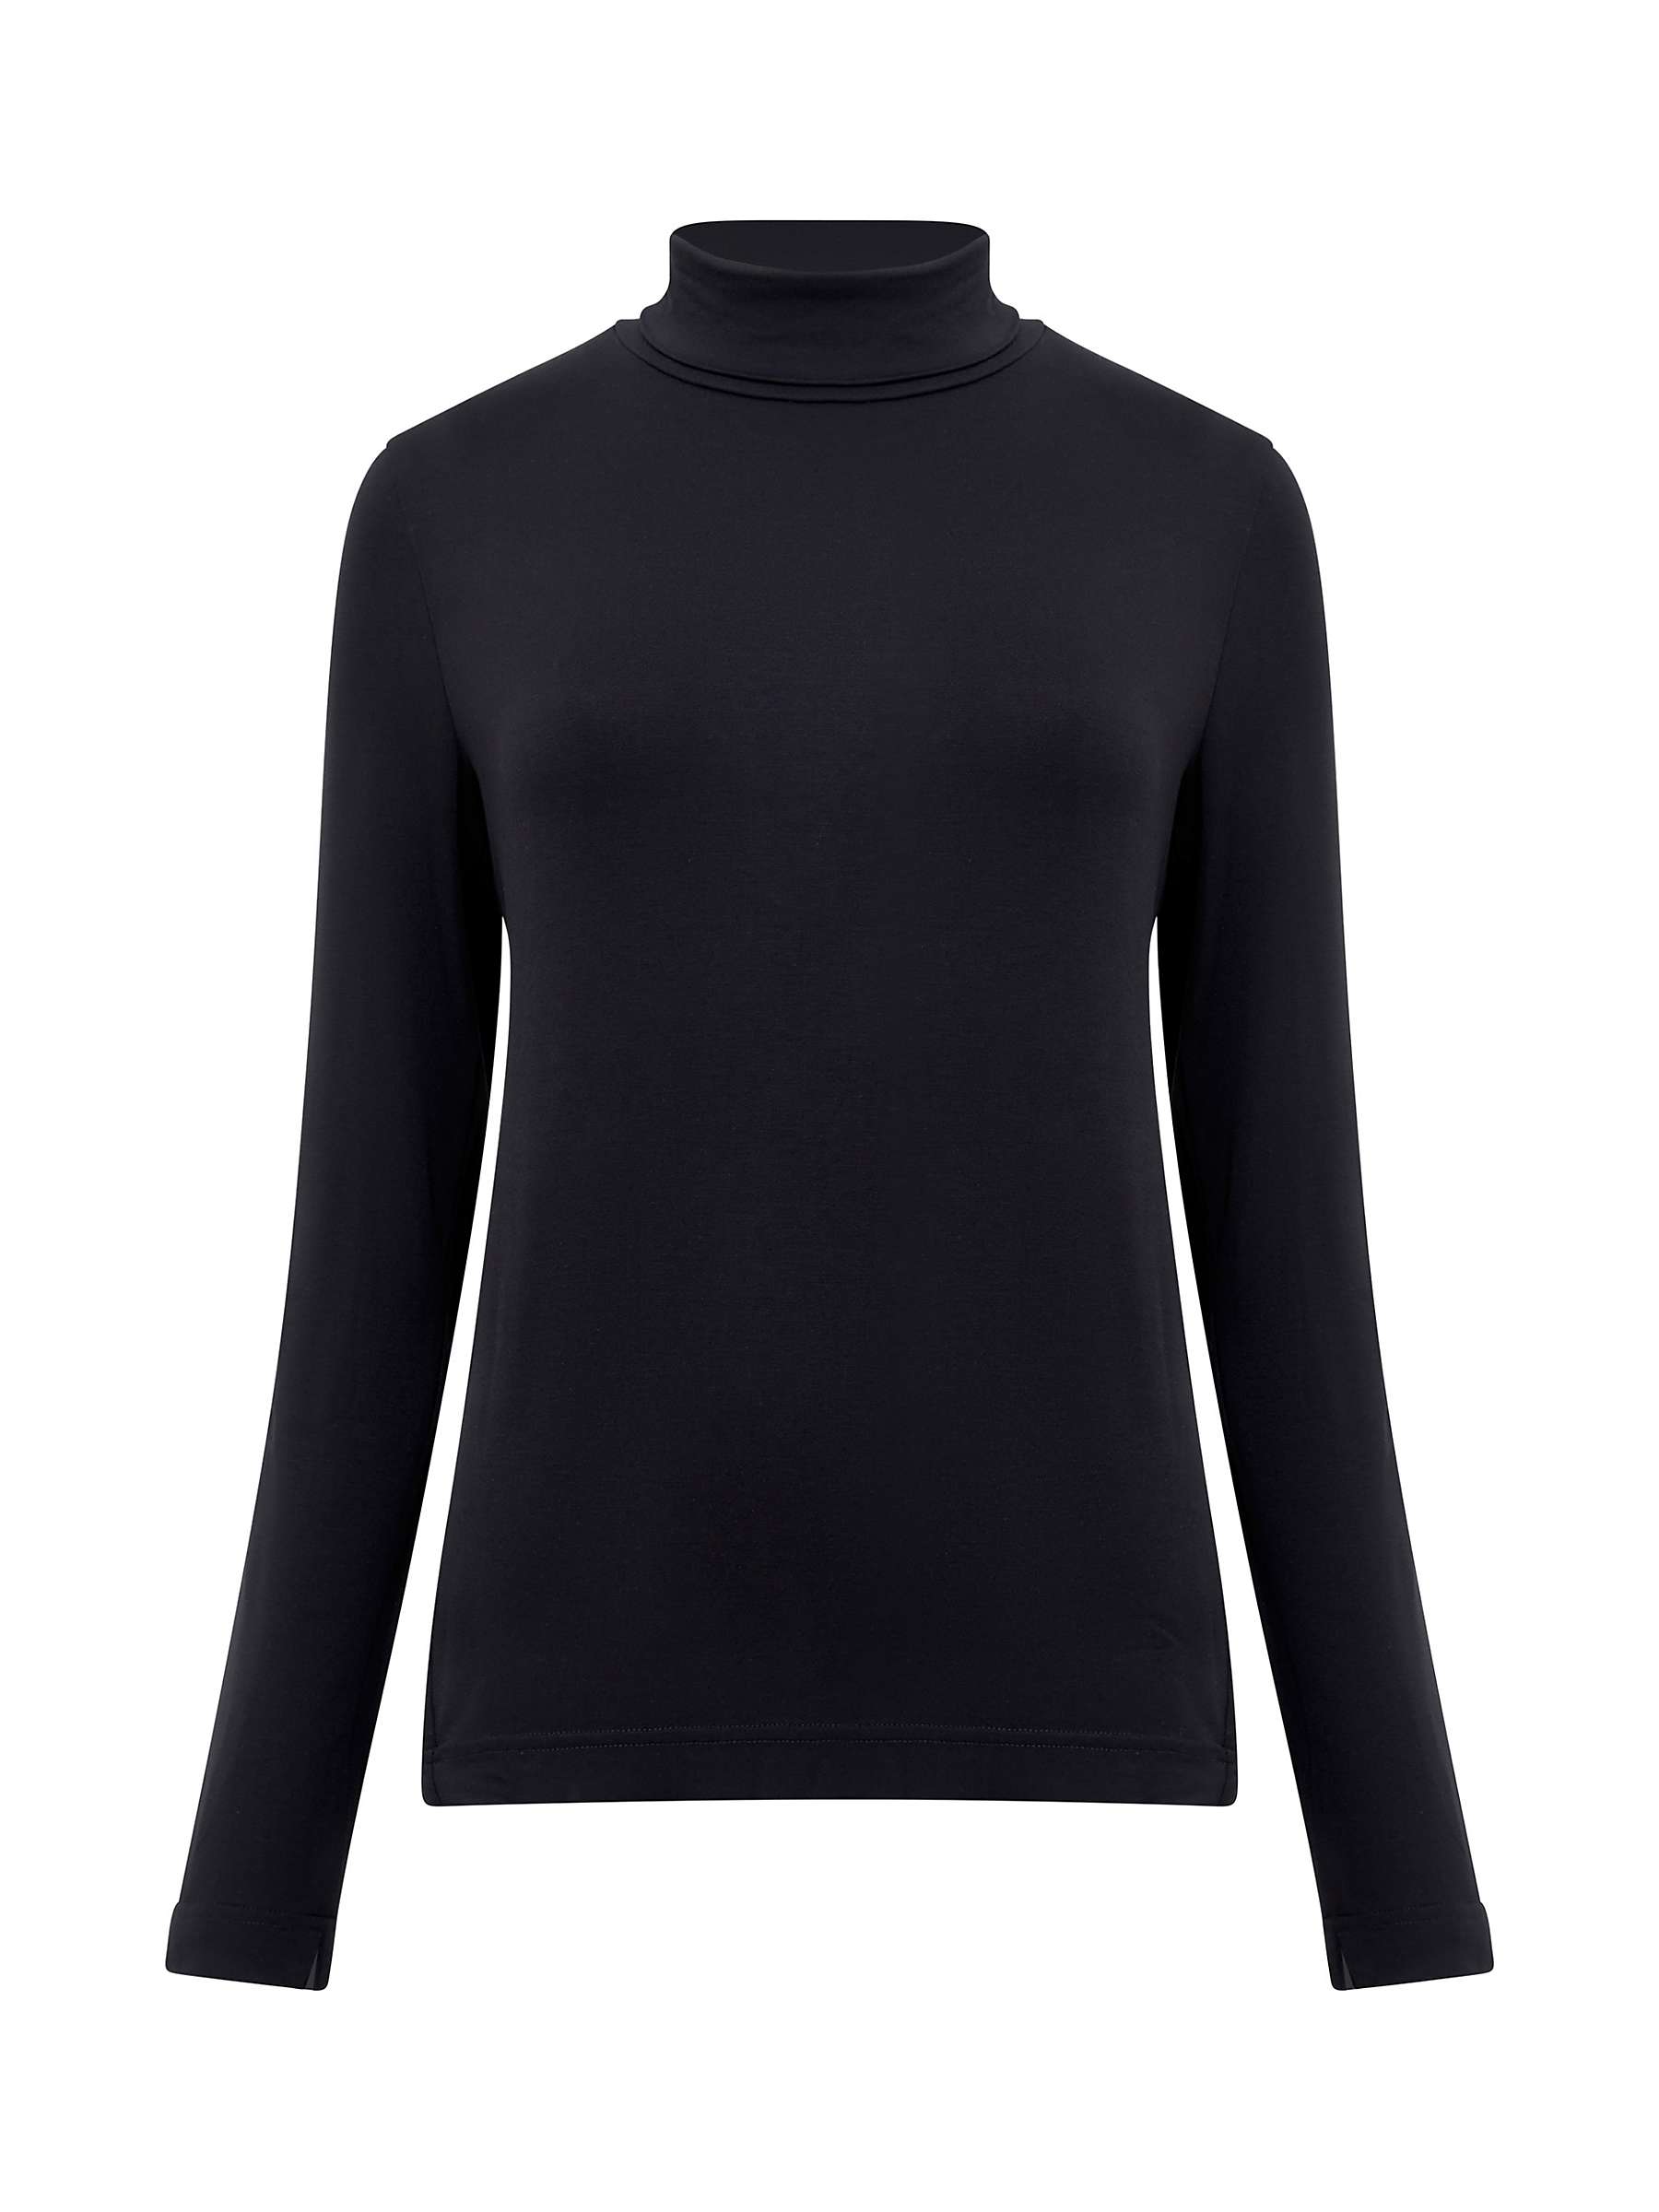 French Connection Venitia Roll Neck Jersey Top, Black at John Lewis ...